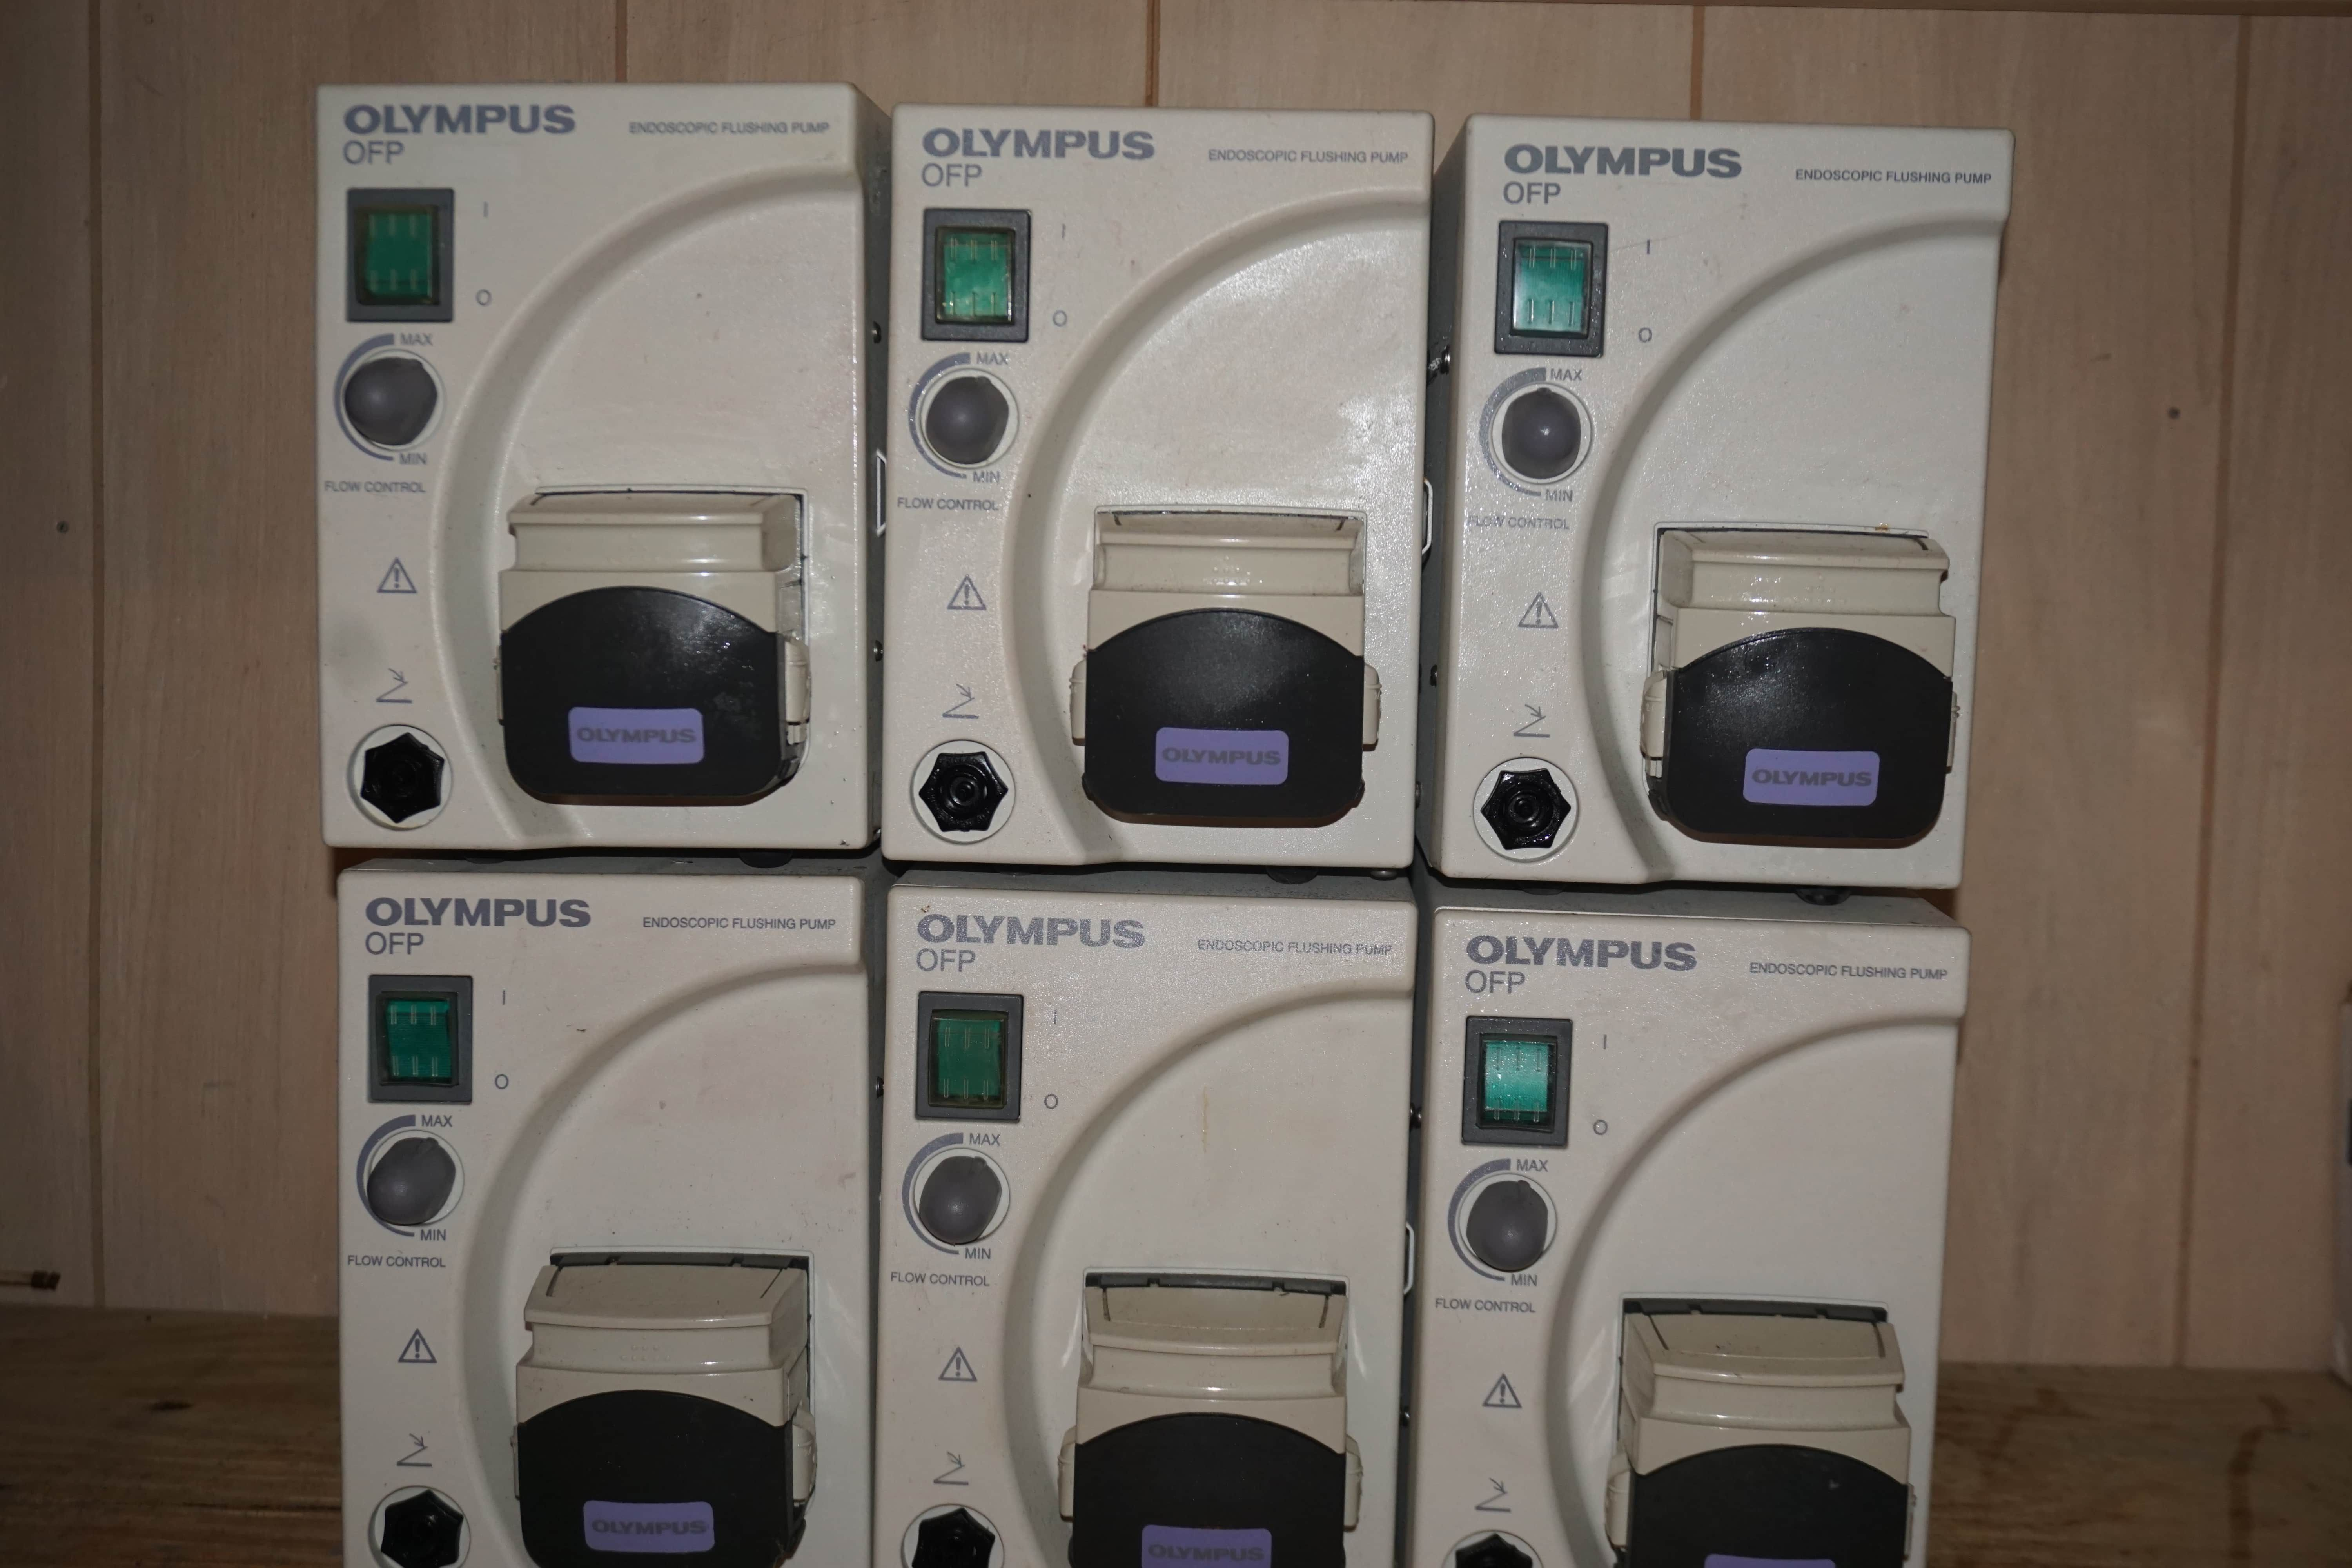 LOT of 6, Olympus OFP Endoscopic Flushing pumps